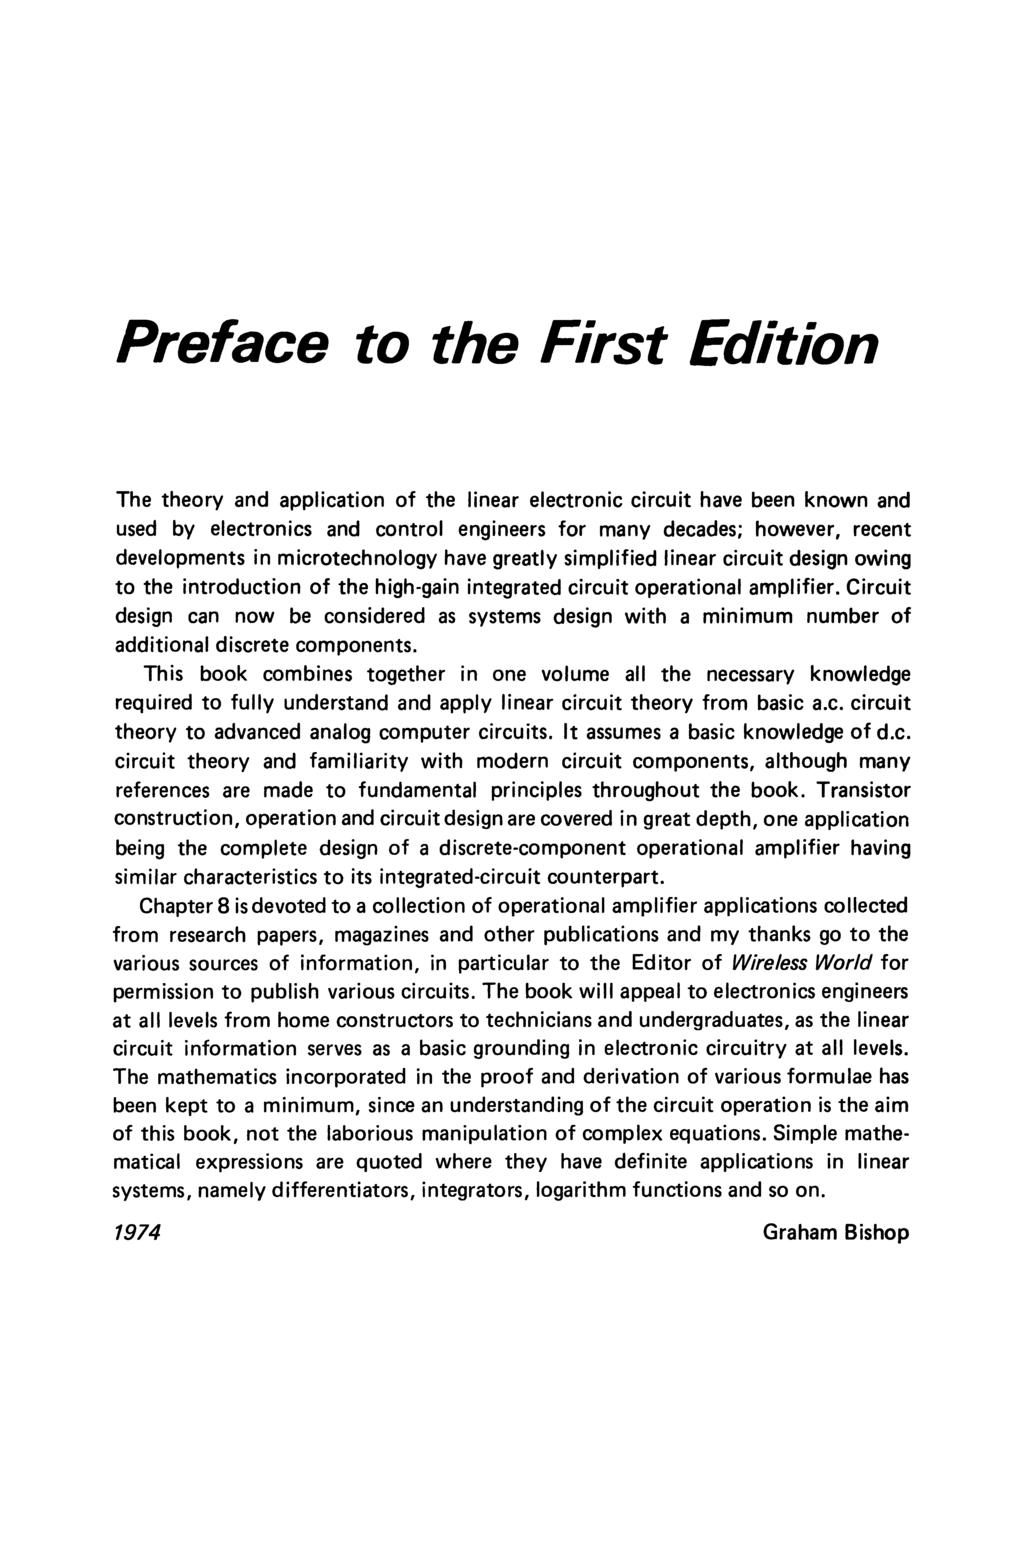 Preface to the First Edition The theory and application of the linear electronic circuit have been known and used by electronics and control engineers for many decades; however, recent developments